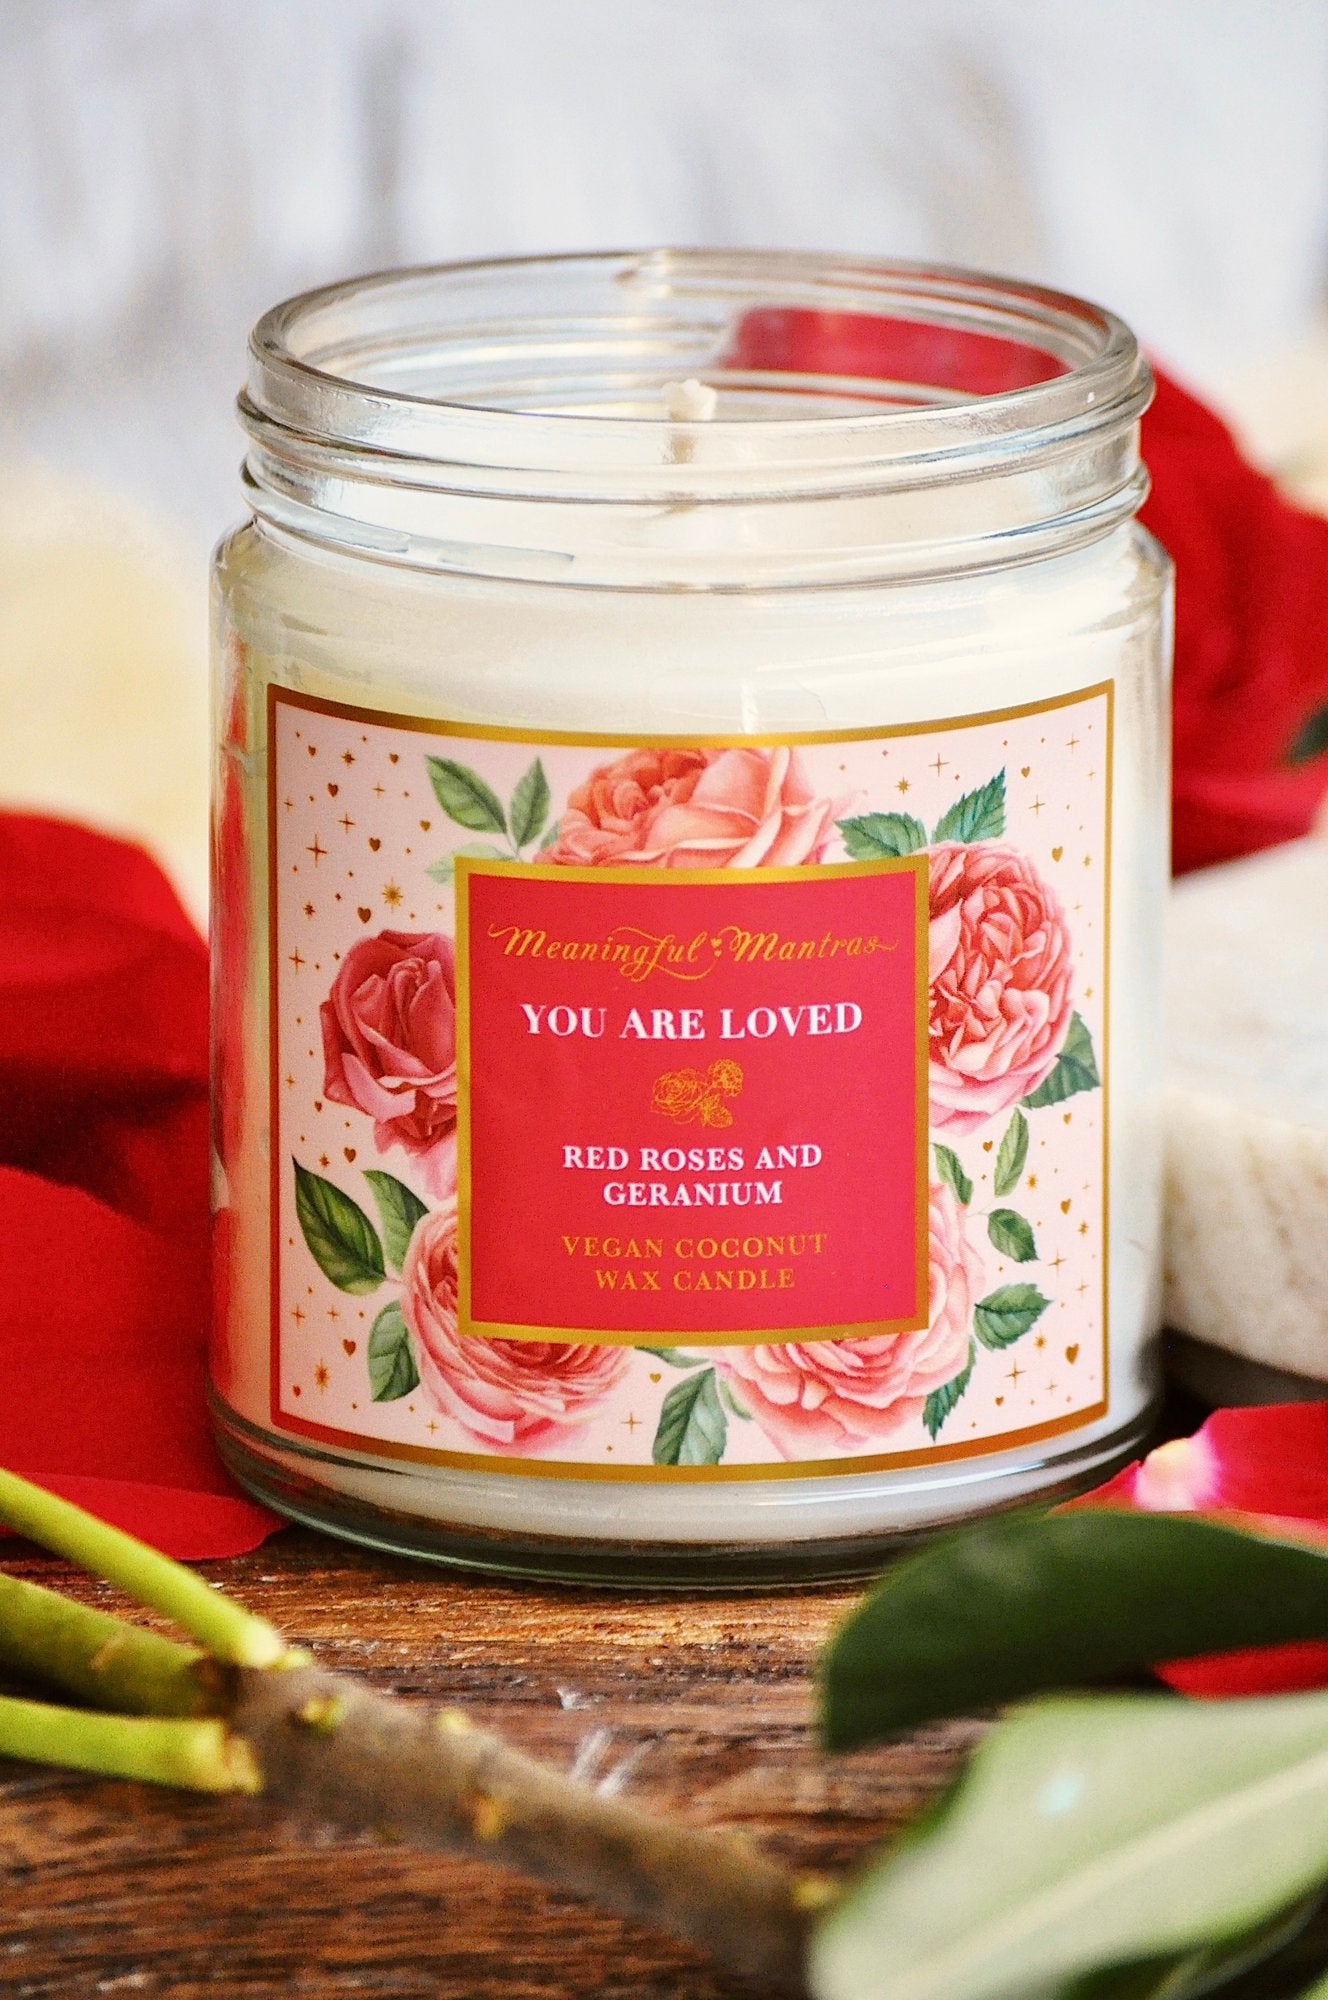 You Are Loved Rose Geranium Candle